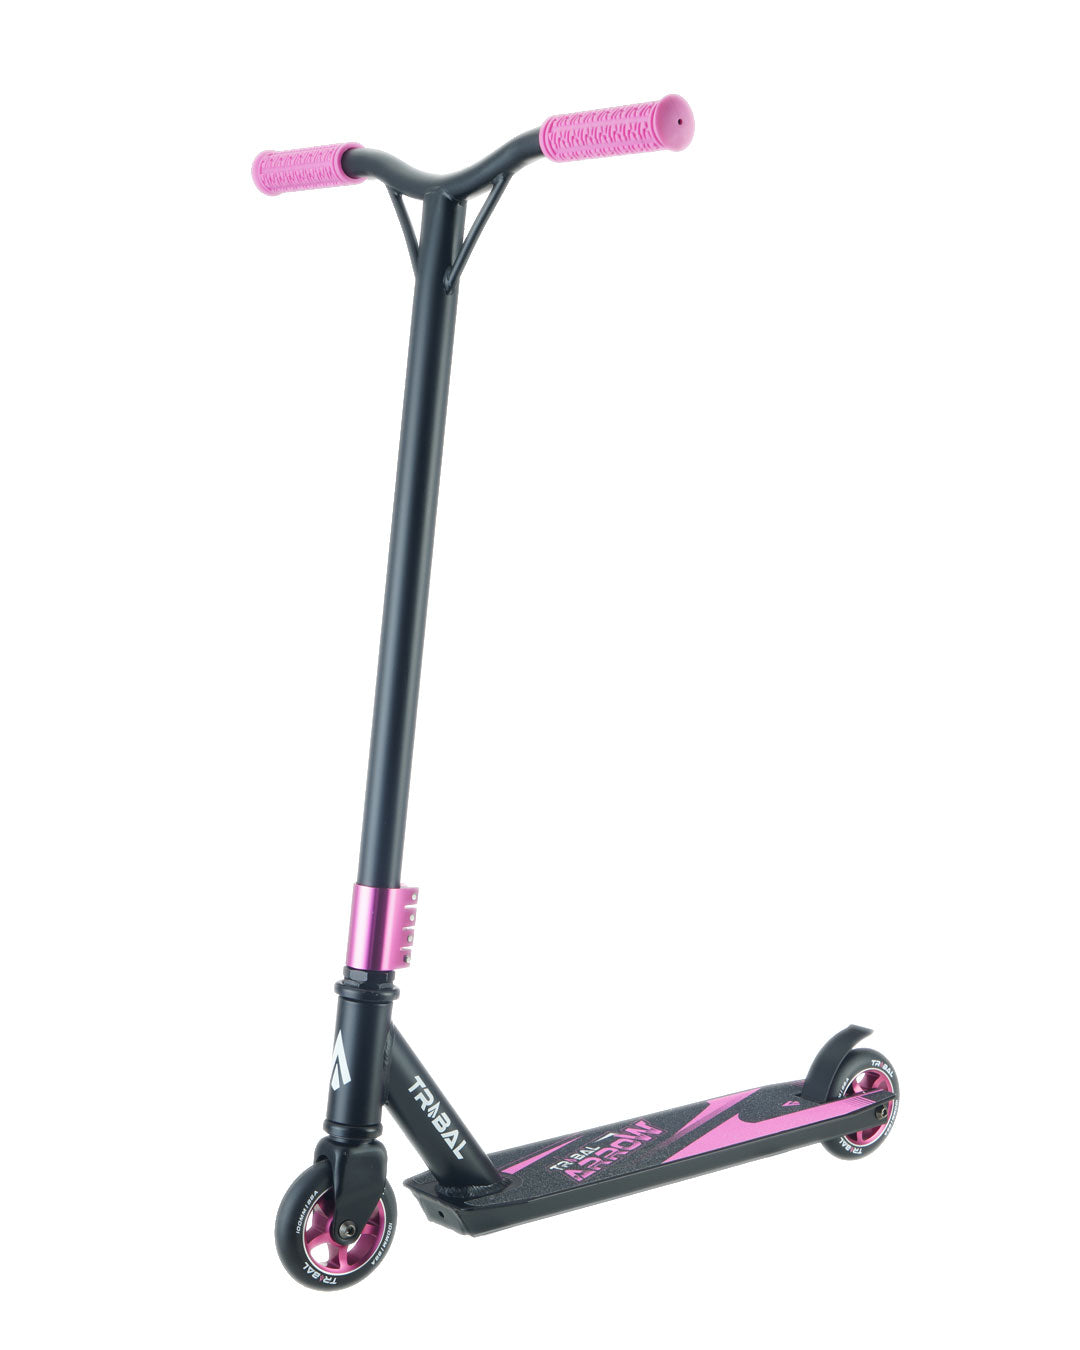 Scooter--arrow-pink-main-front45.jpg